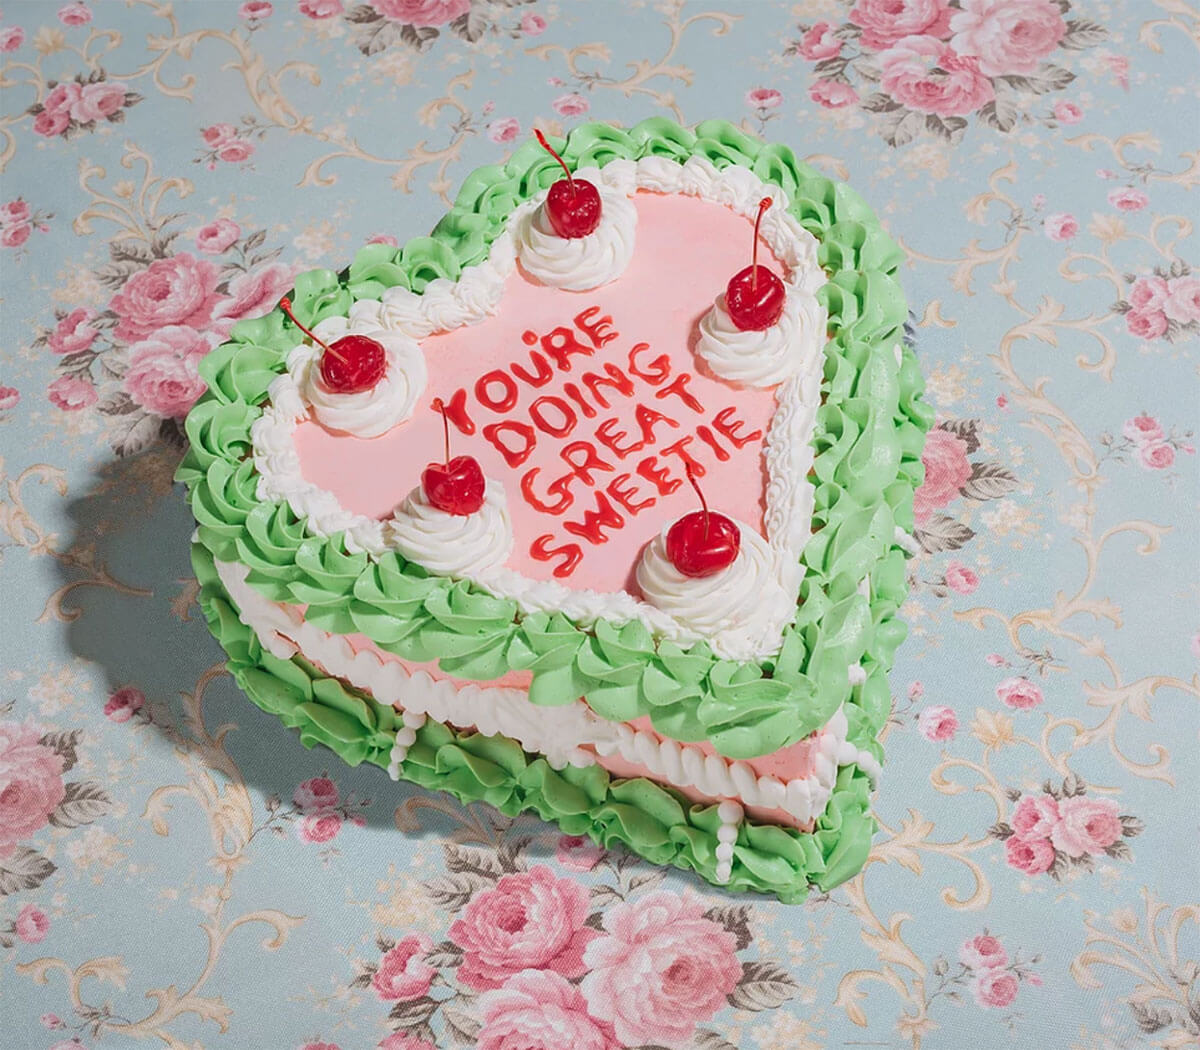 Green, pink and white heart-shaped cake by Briony Douglas, one of  many Canadian visual artists